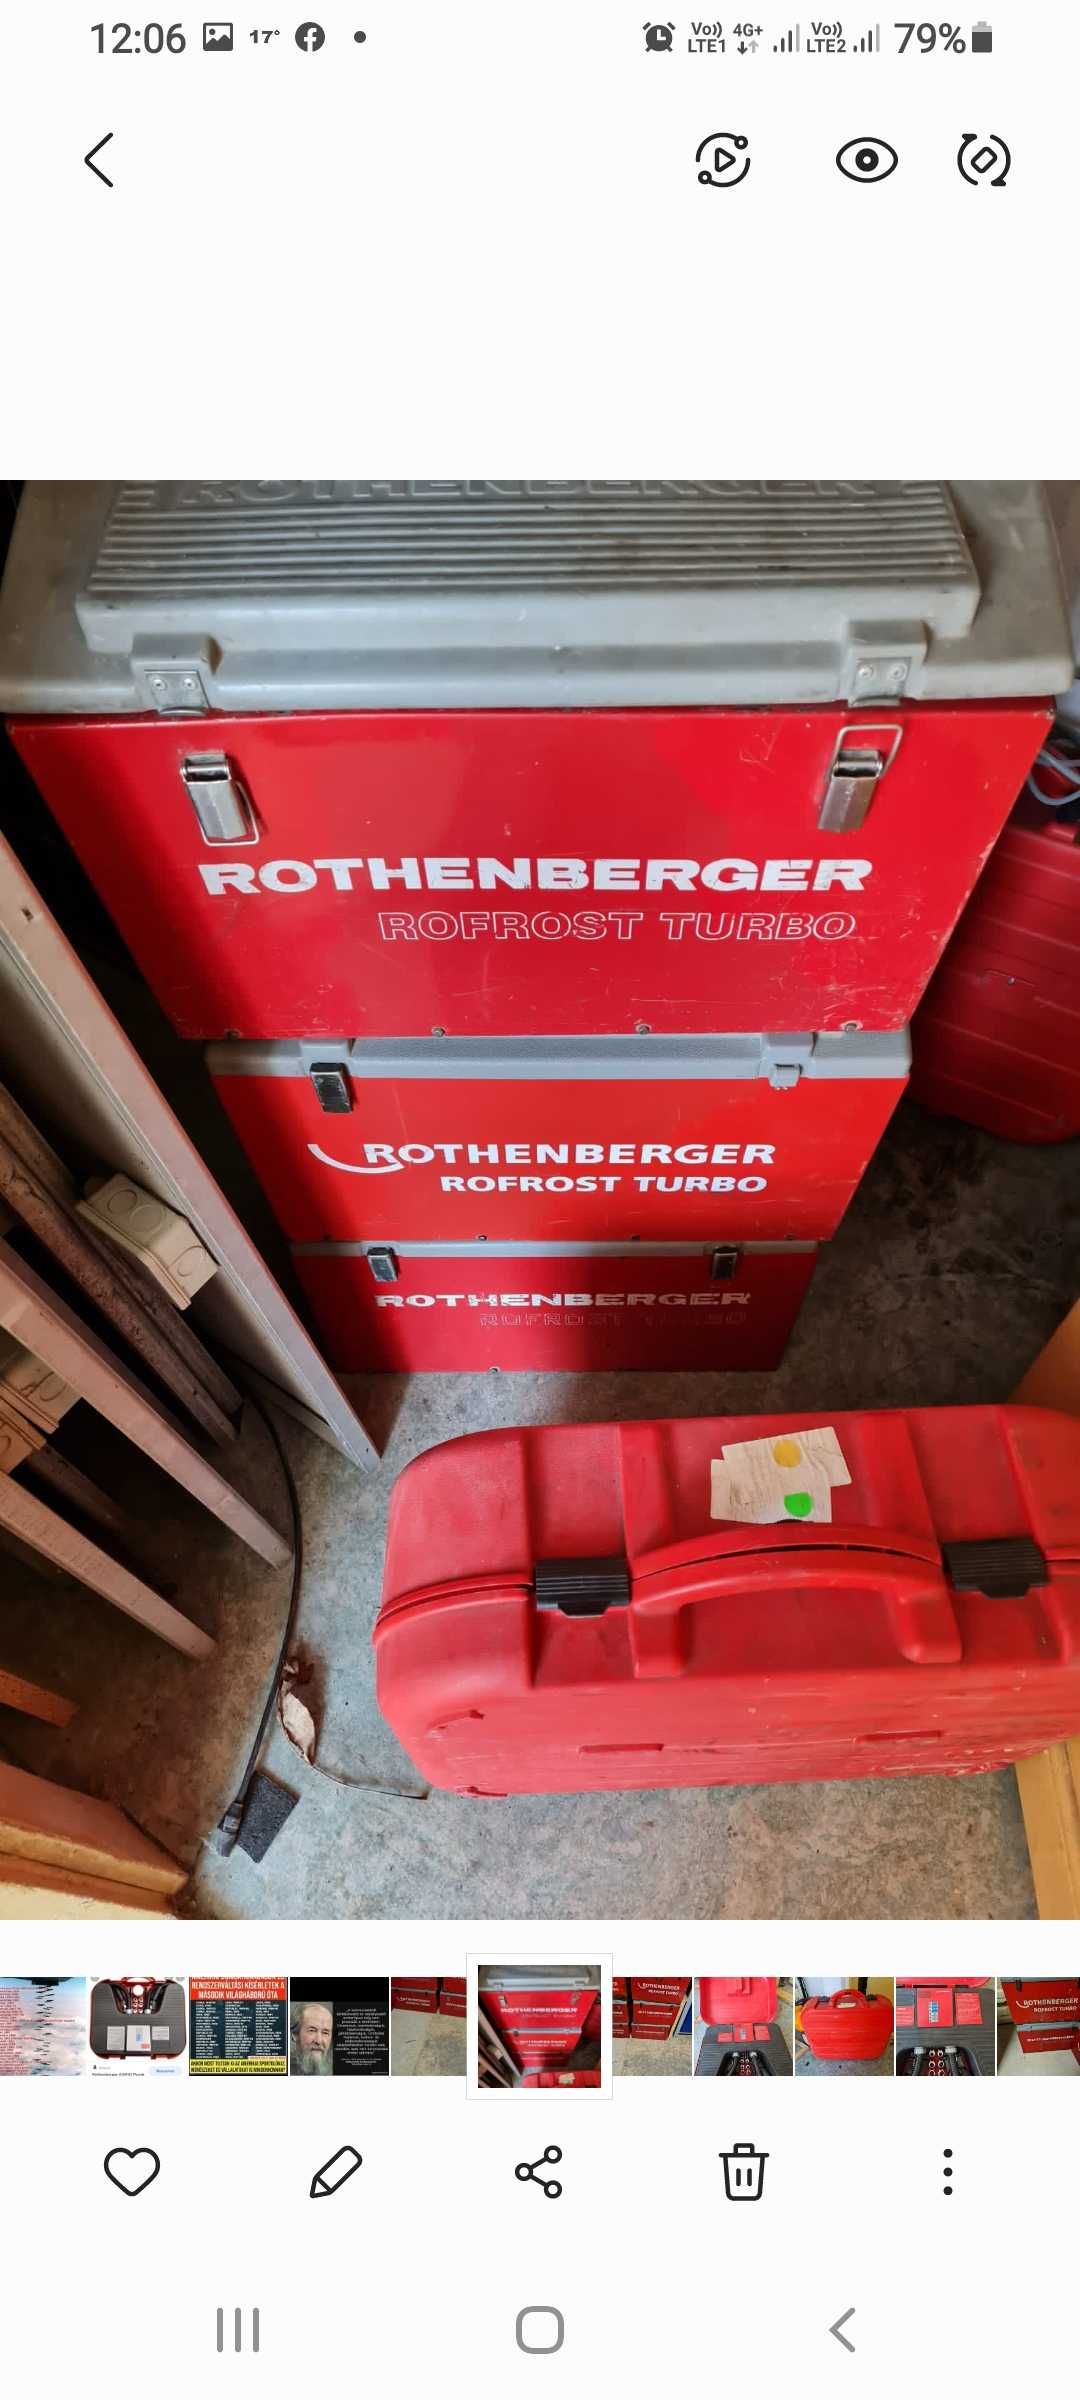 Rothenberger Refrost Turbo